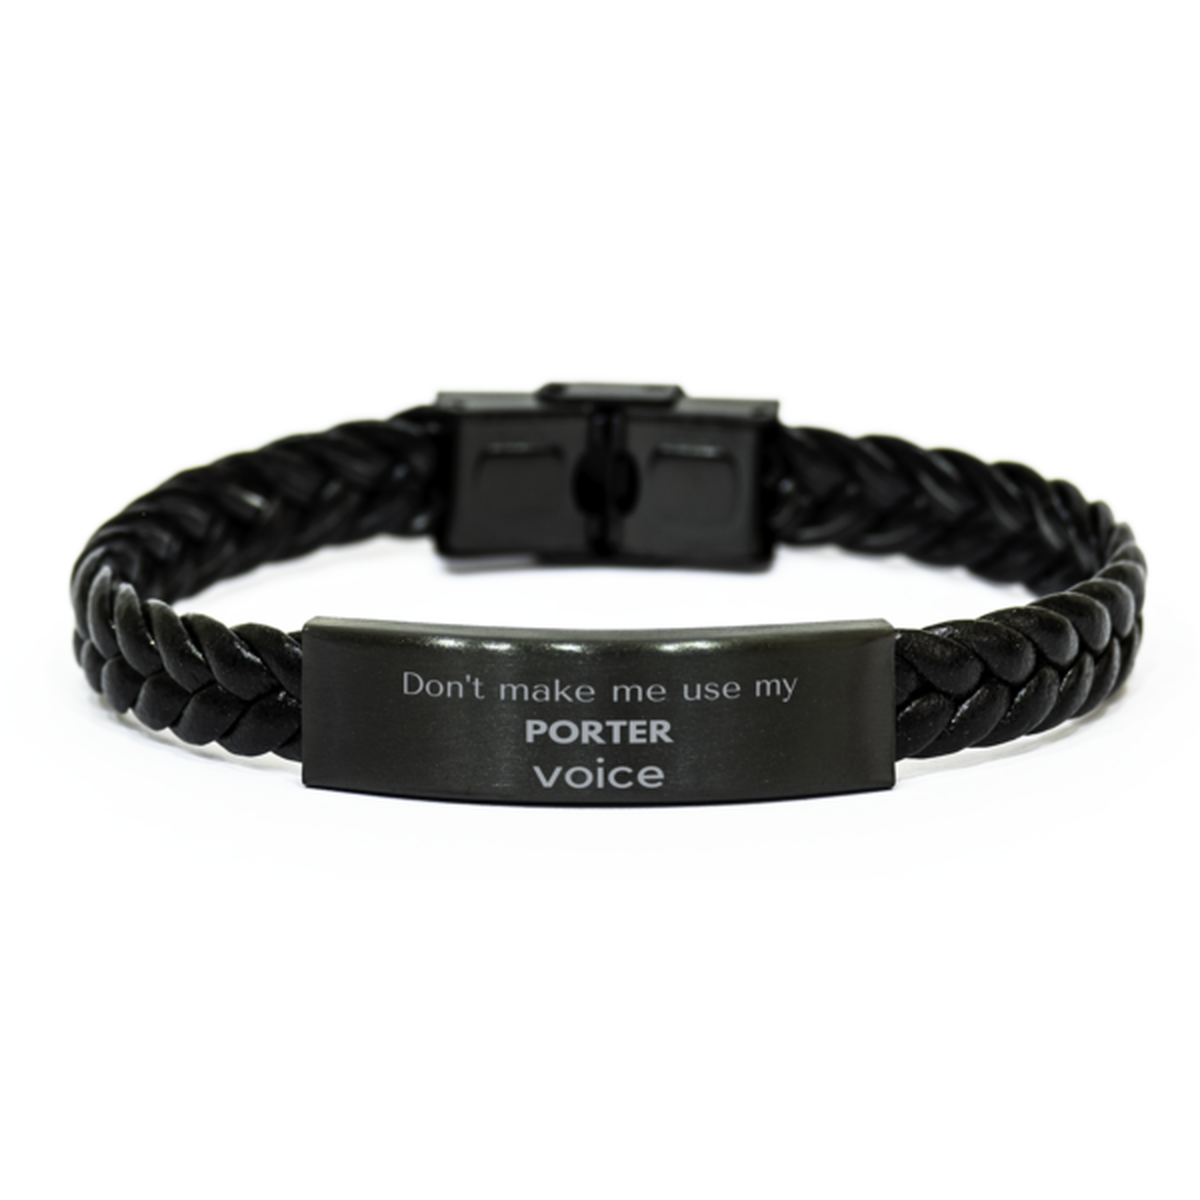 Don't make me use my Porter voice, Sarcasm Porter Gifts, Christmas Porter Braided Leather Bracelet Birthday Unique Gifts For Porter Coworkers, Men, Women, Colleague, Friends